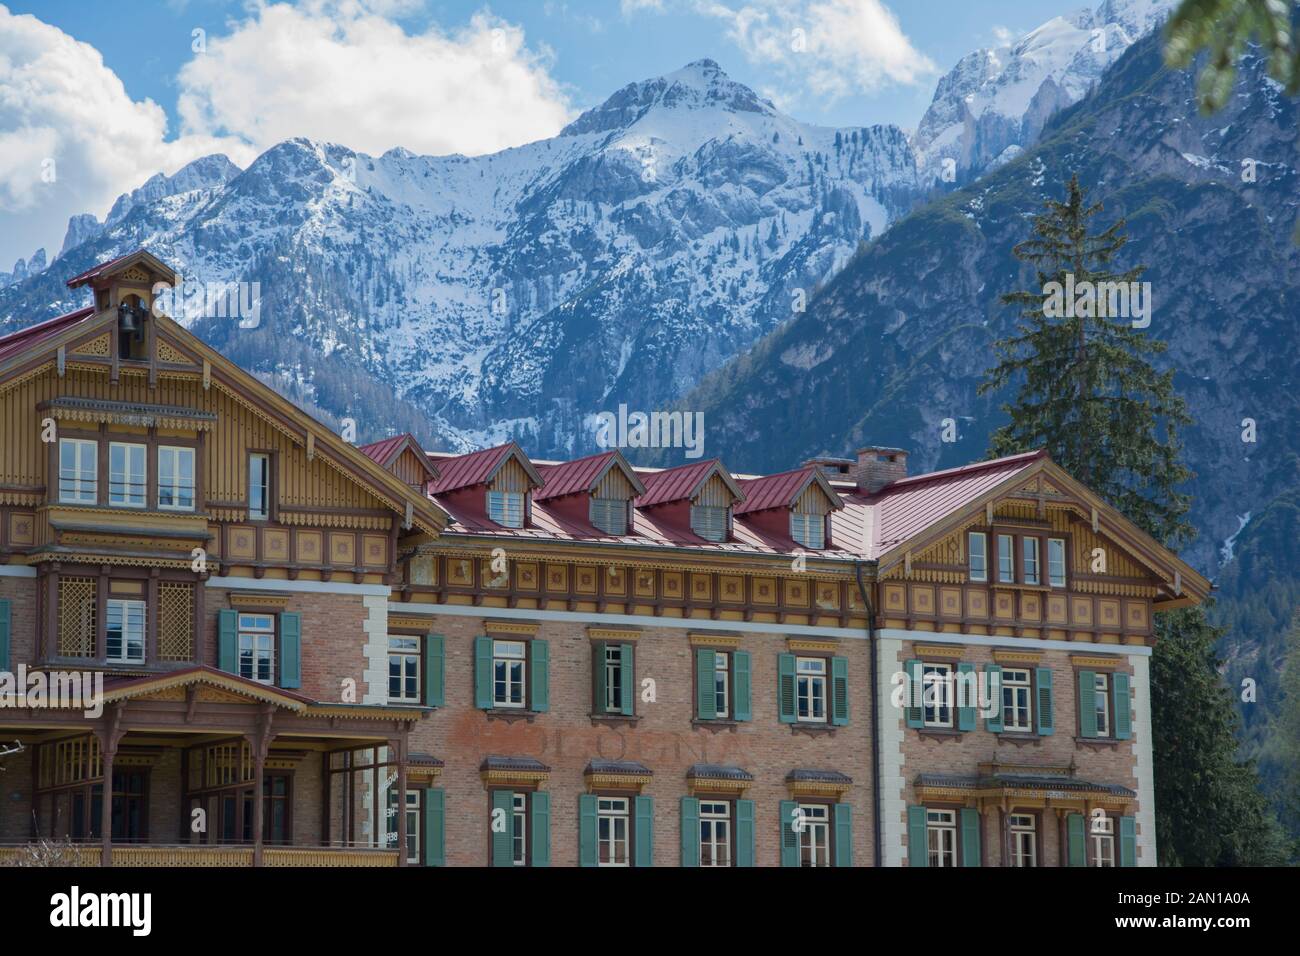 View of the Grand Hotel Toblach with mountains and trees in the background Stock Photo